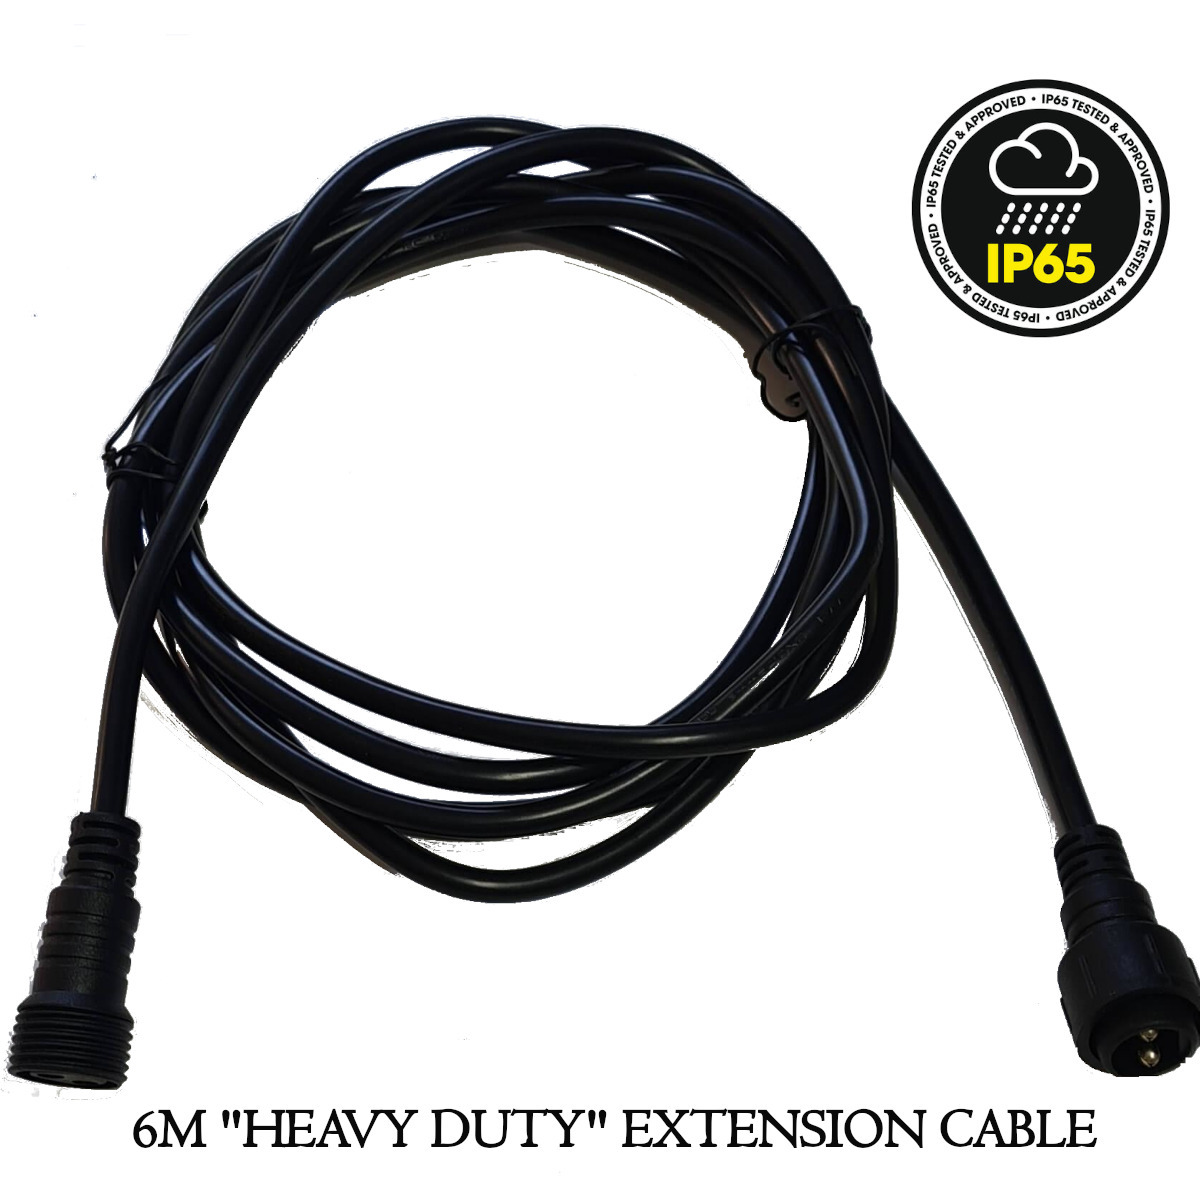 6 Metre Extension Cable For Heavy Duty Waterproof Outdoor String Lights - 6M